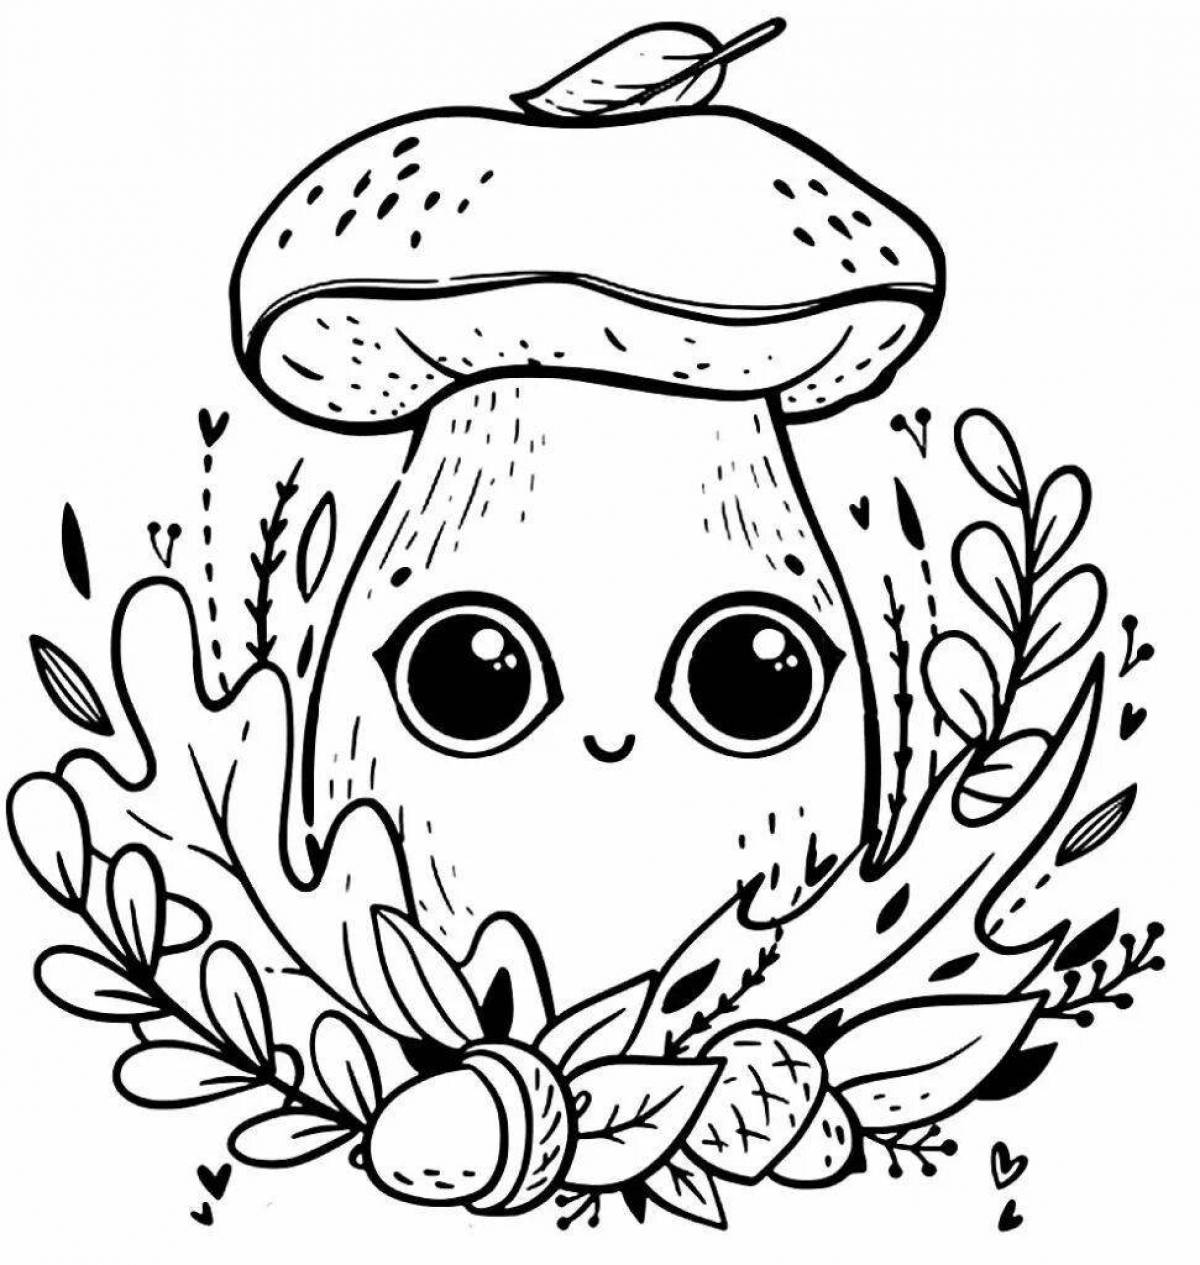 Coloring book bright fly agaric frog